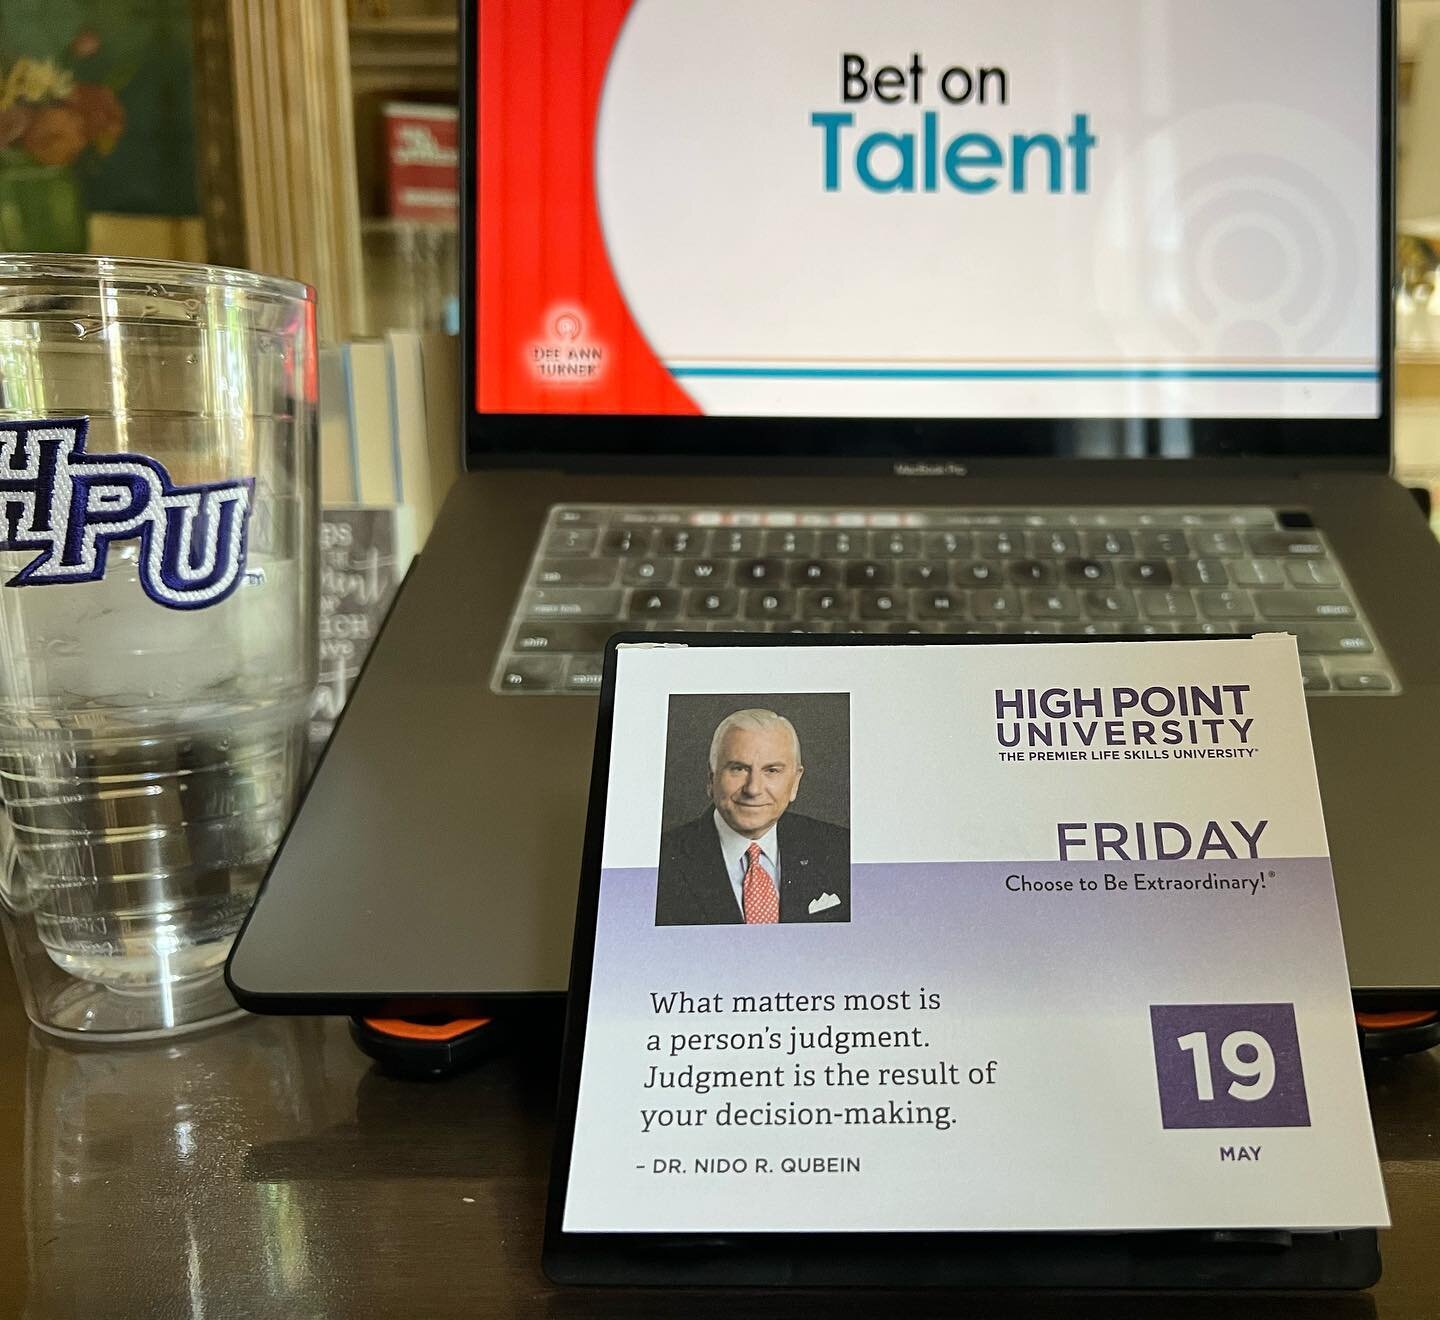 How do you evaluate character in your job candidates? Examine their judgment and ask the question, &quot;what is their track record of decision making?&quot;

Good advice from Dr. Qubein at @highpointu : &quot;What matters most is a person's judgment